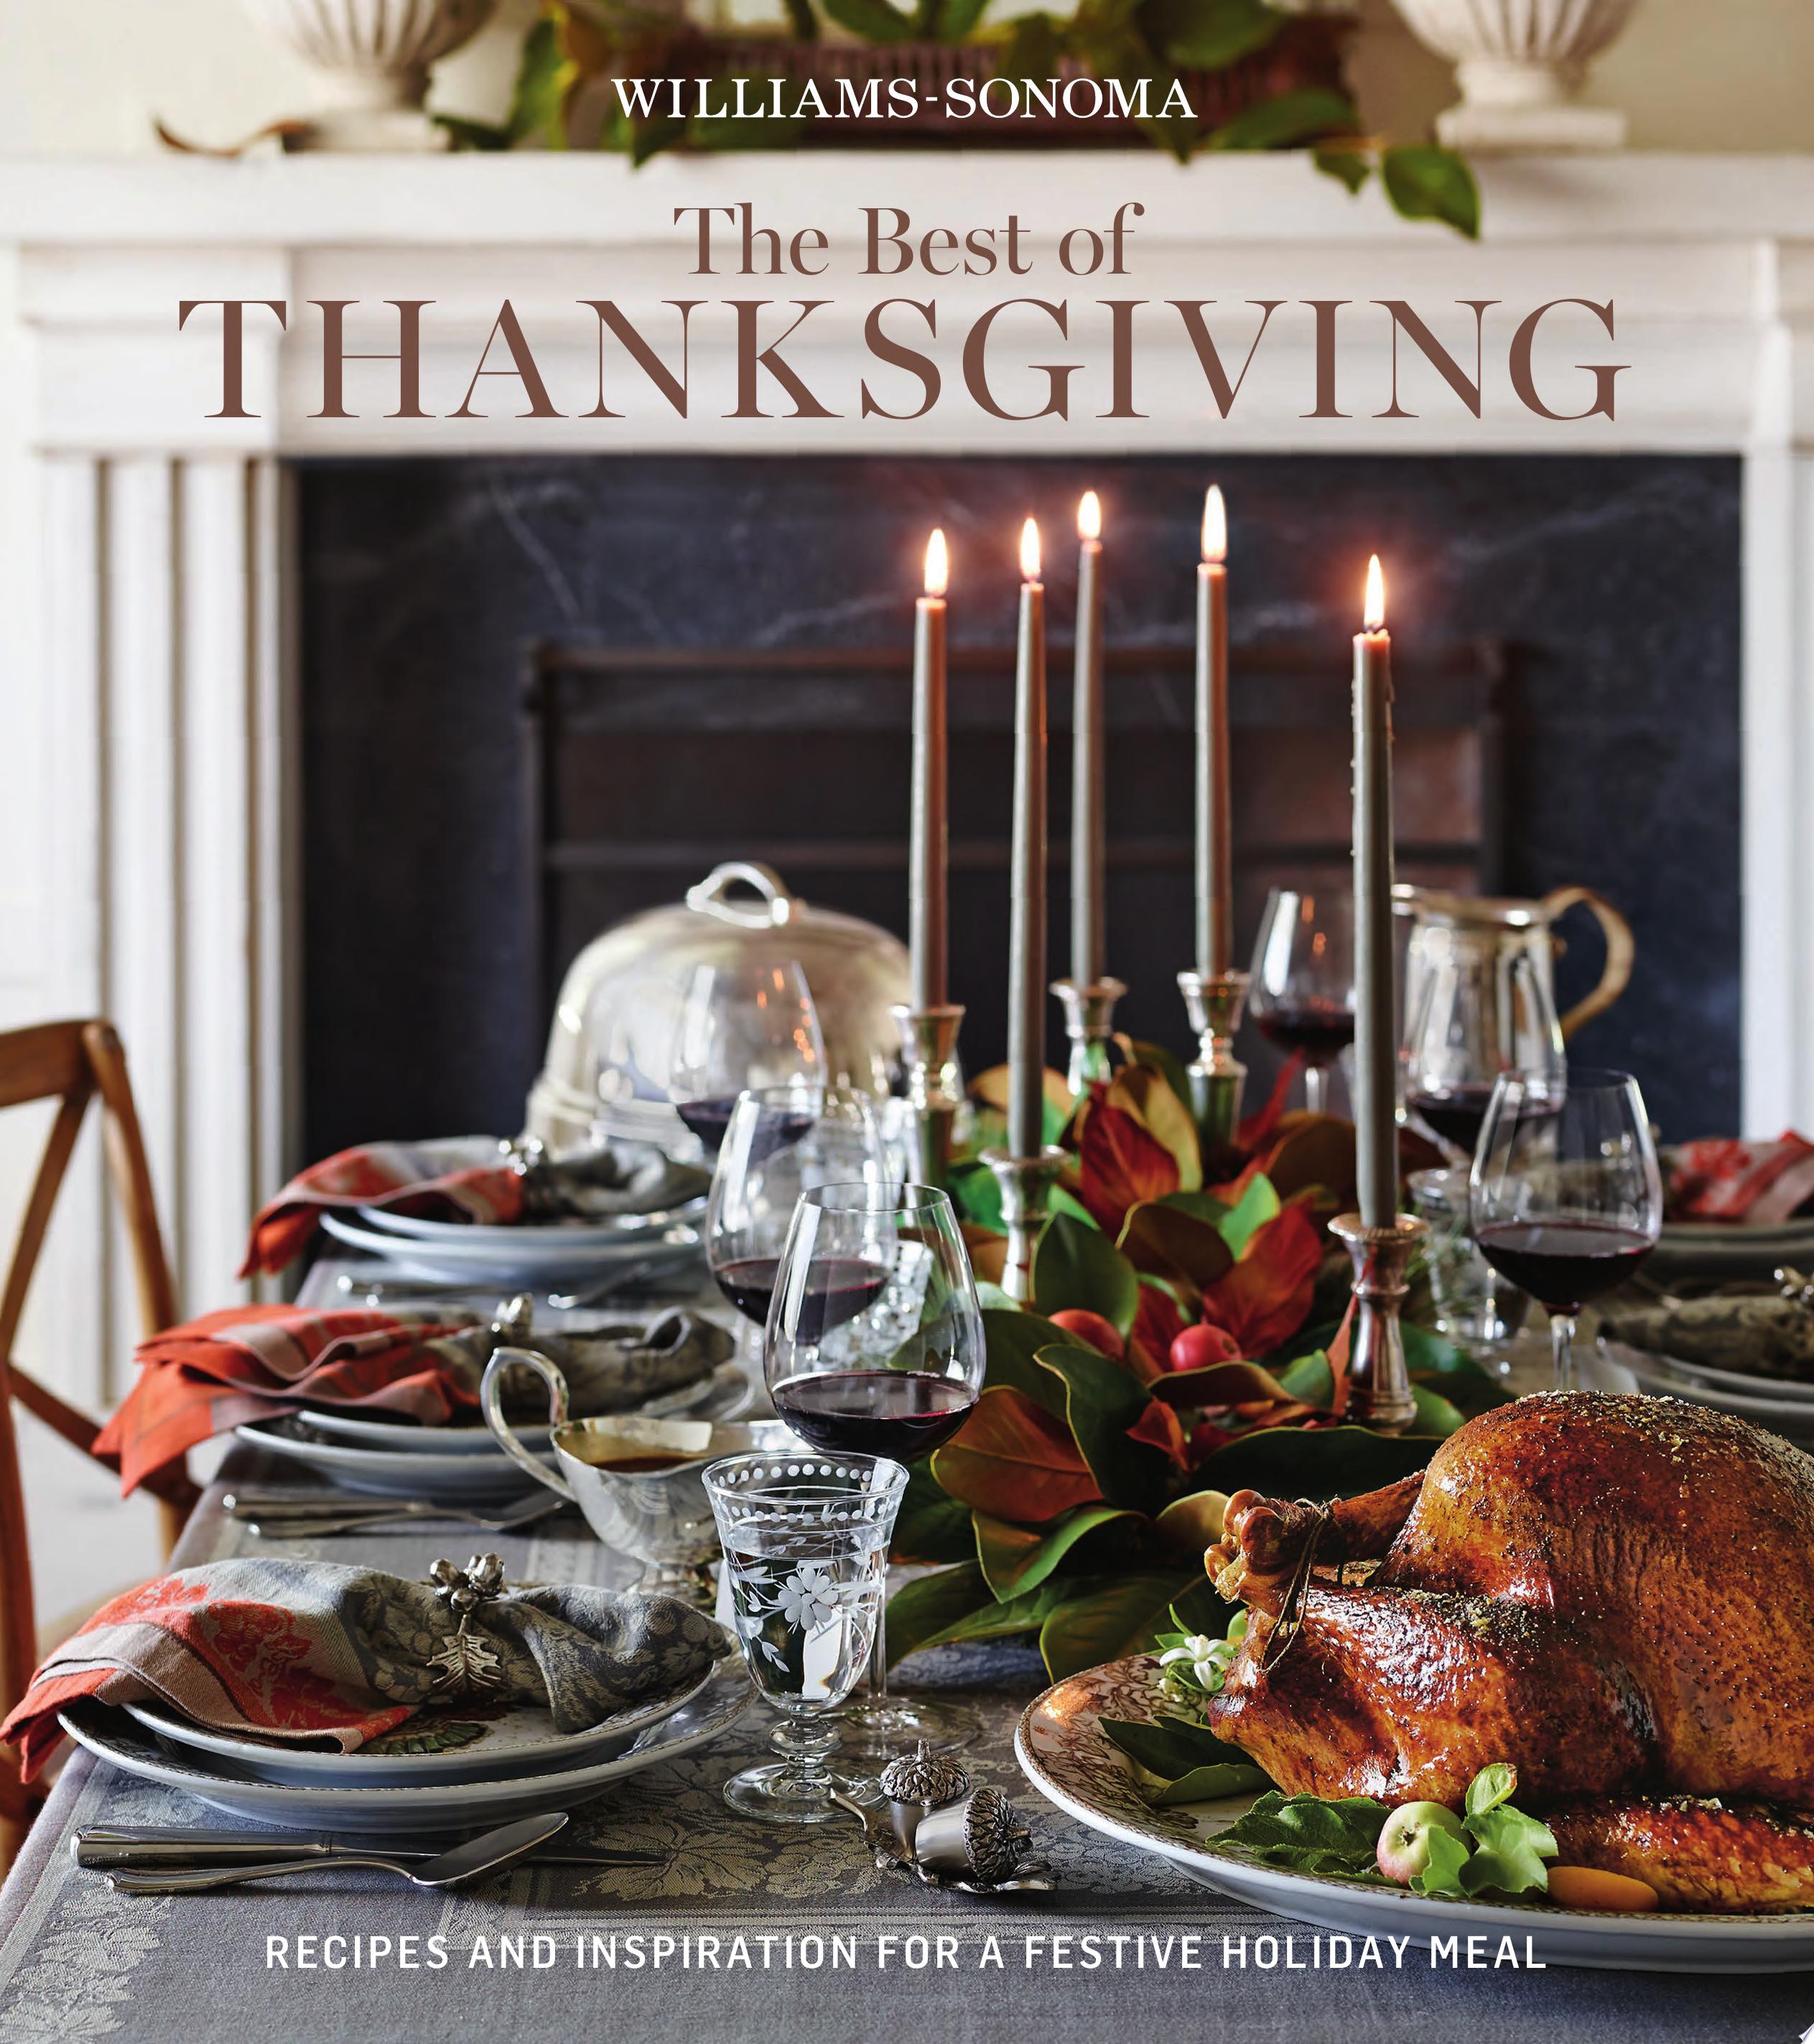 Image for "The Best of Thanksgiving"